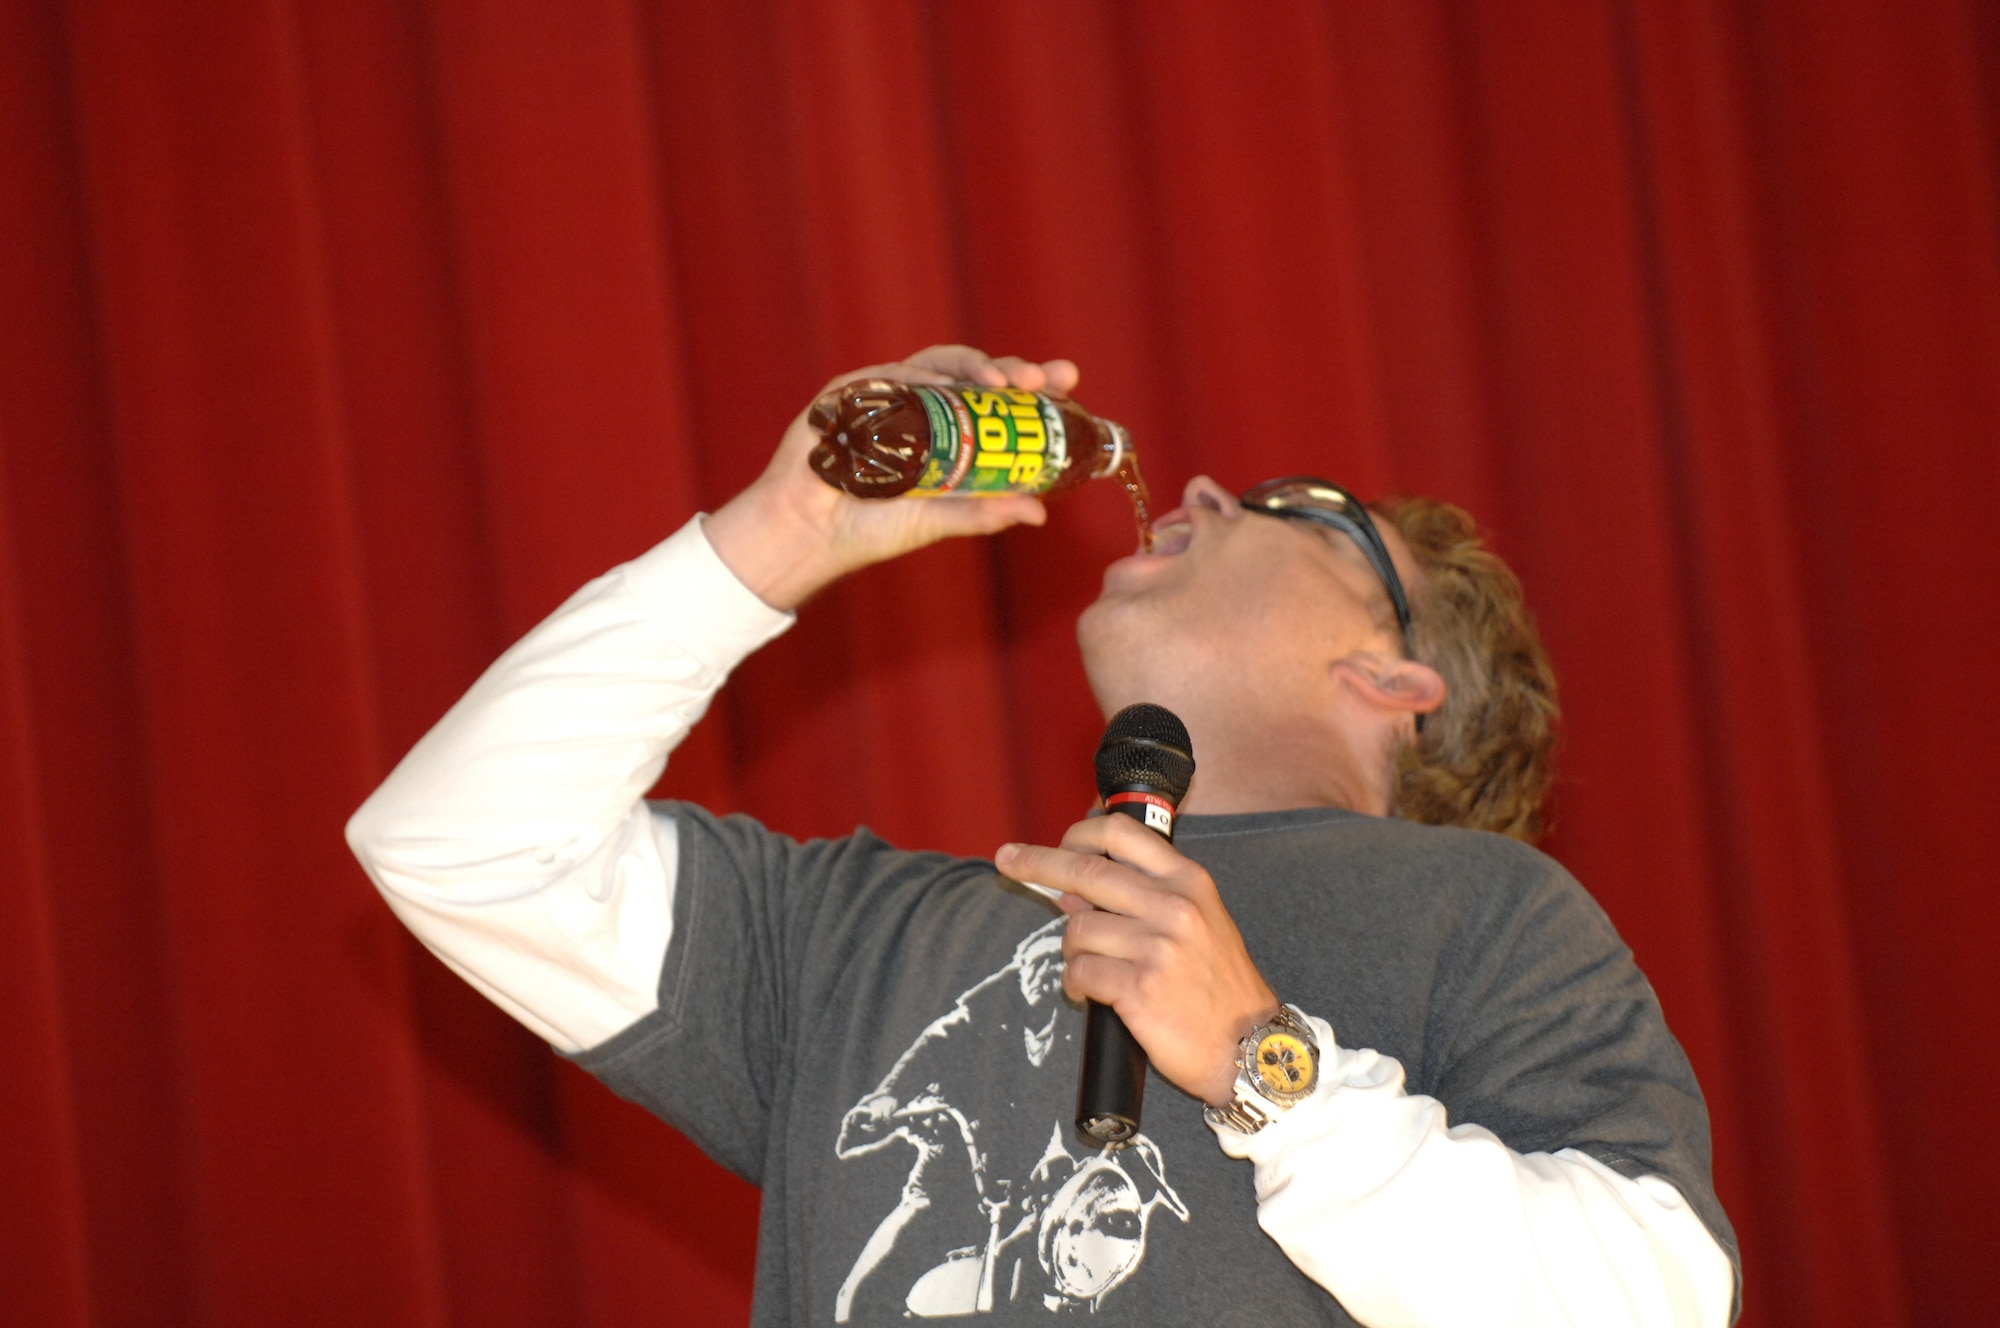 BOTTOMS-UP: Jeff Hodgson, 452 MSG, simulates drinking a bottle of household cleaner as part of his comedy act. (U.S. Air Force photo)